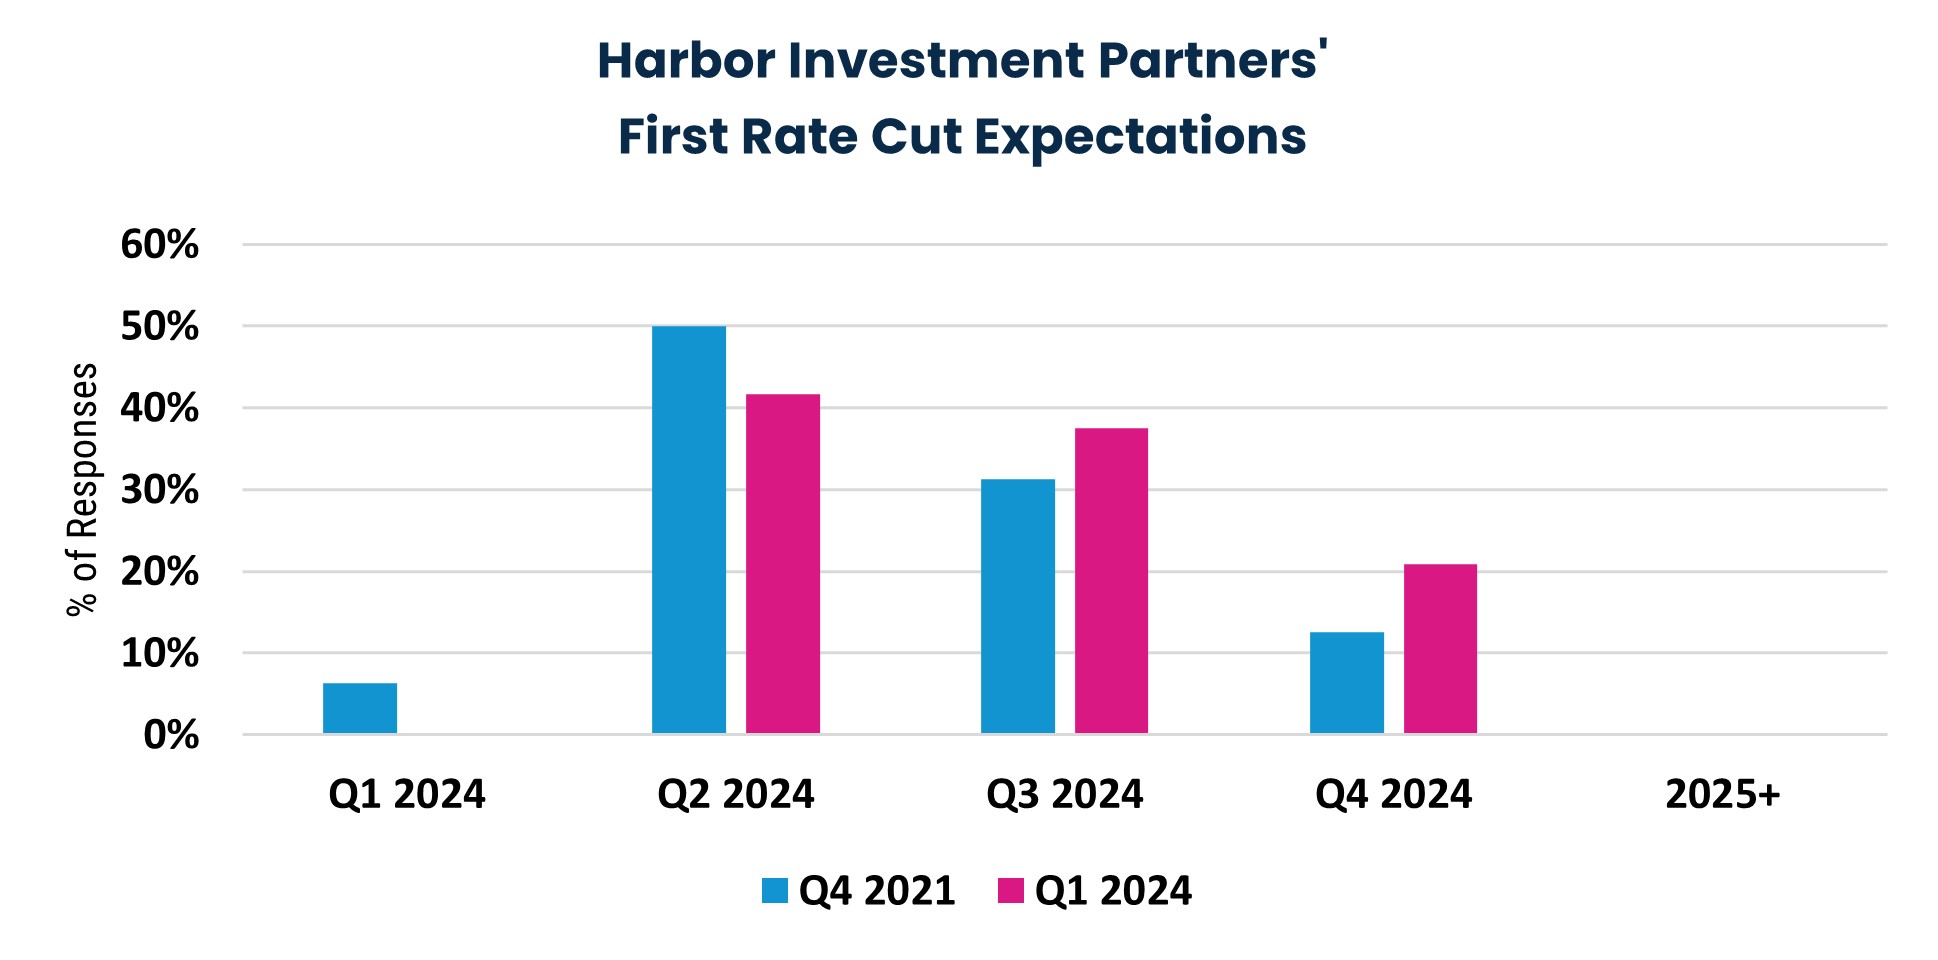 Harbor Investment Partners' First Rate Cut Expectations